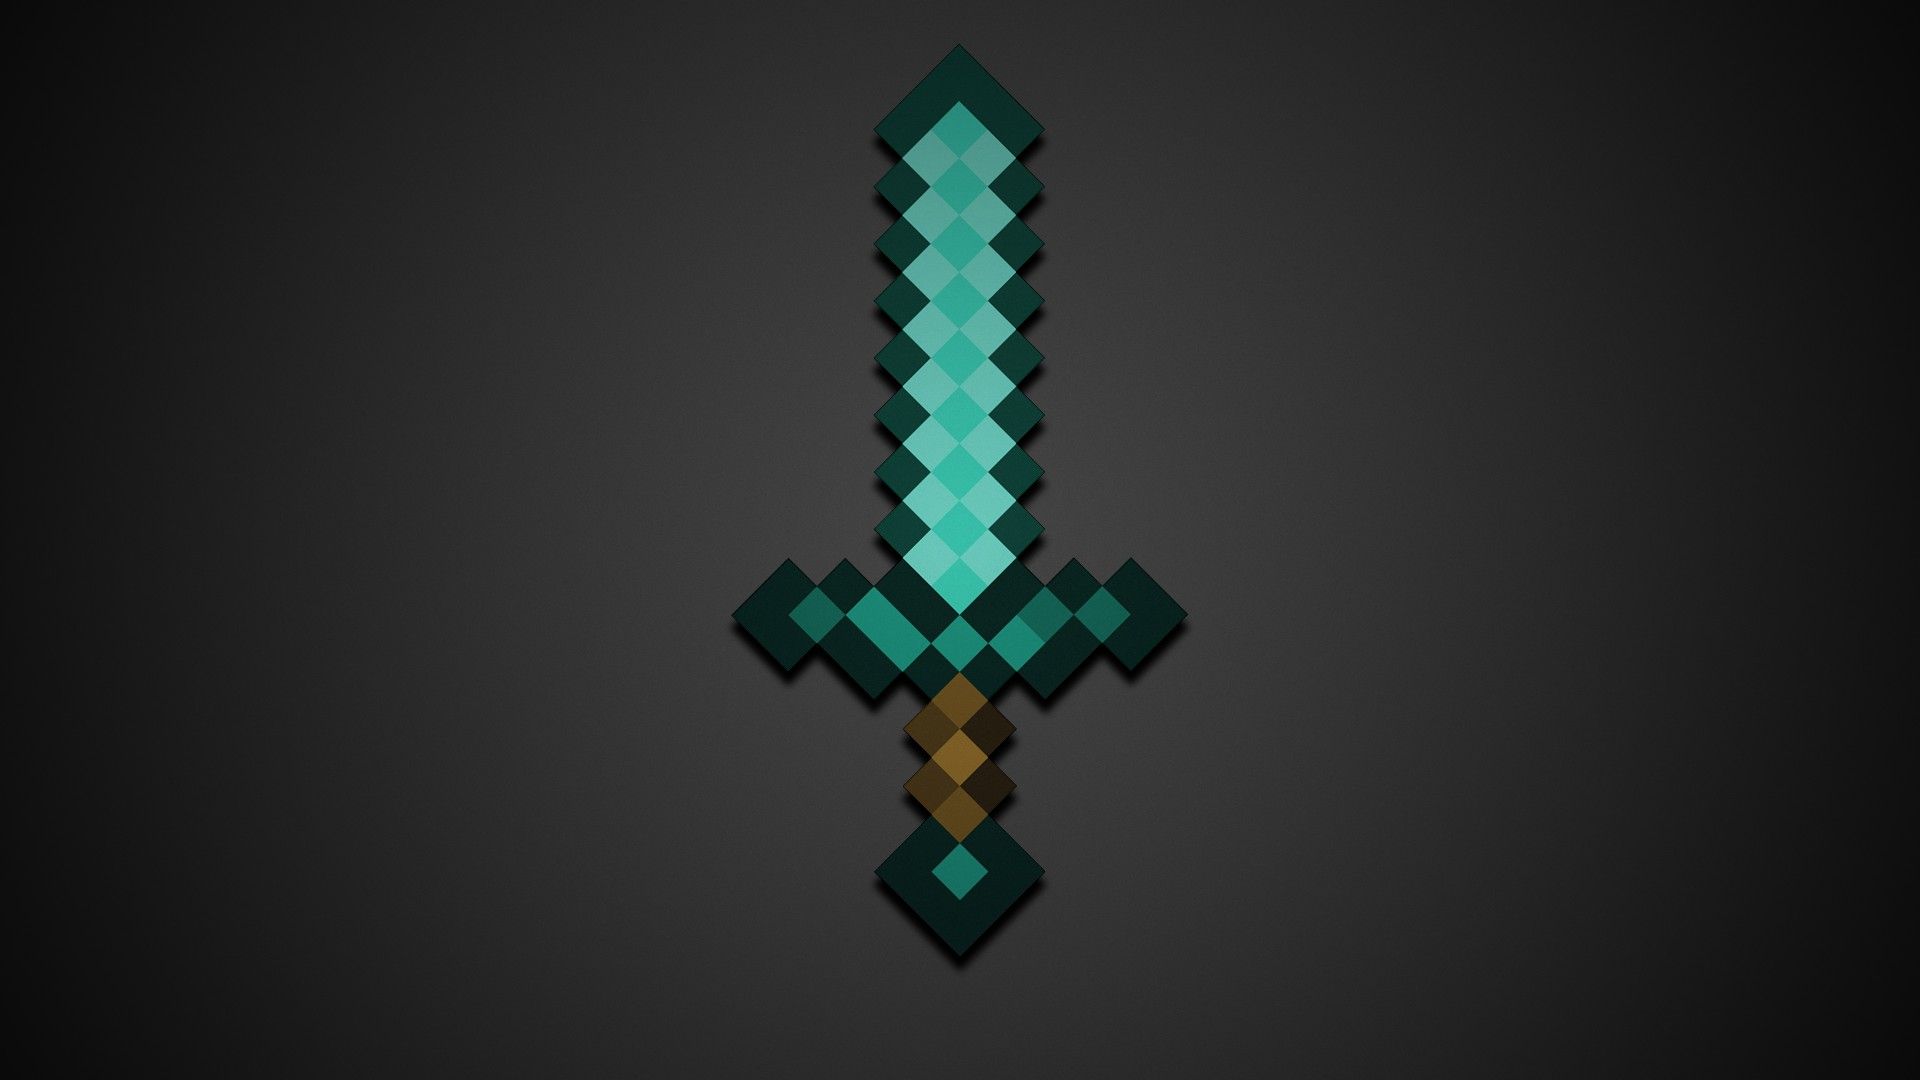 Minecraft Live Wallpaper For Android Minecraft Wallpapers Minecraft Sword Wallper 19x1080 Wallpaper Teahub Io